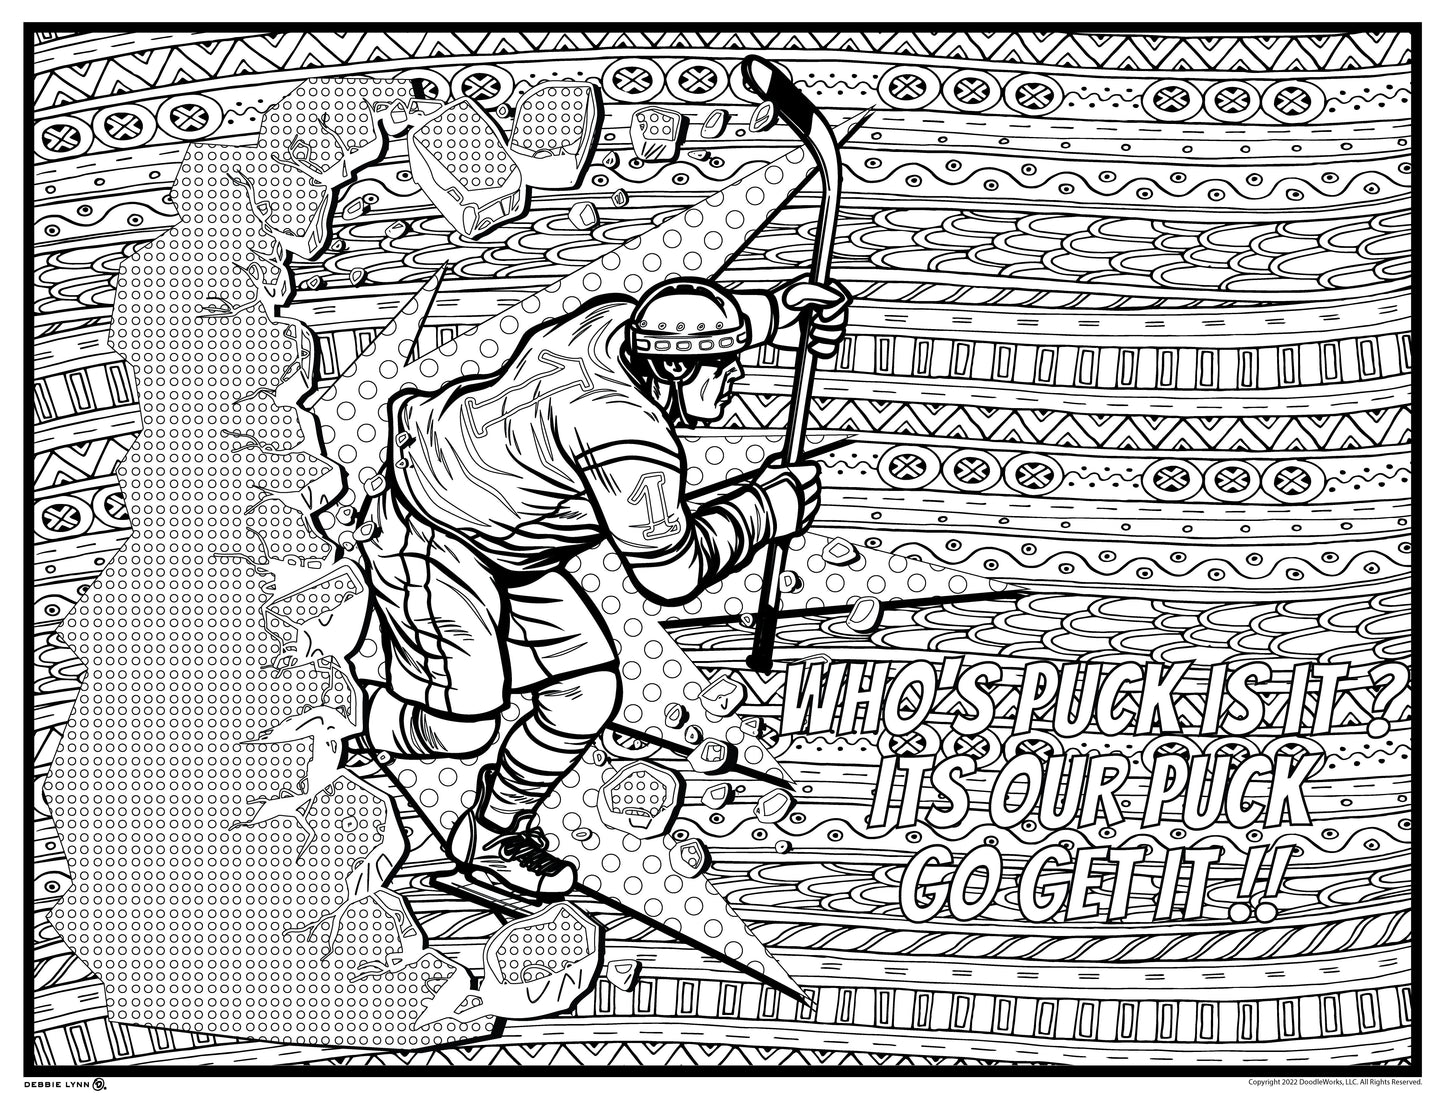 It's Our Puck Hockey Personalized Giant Coloring Poster 46"x60"